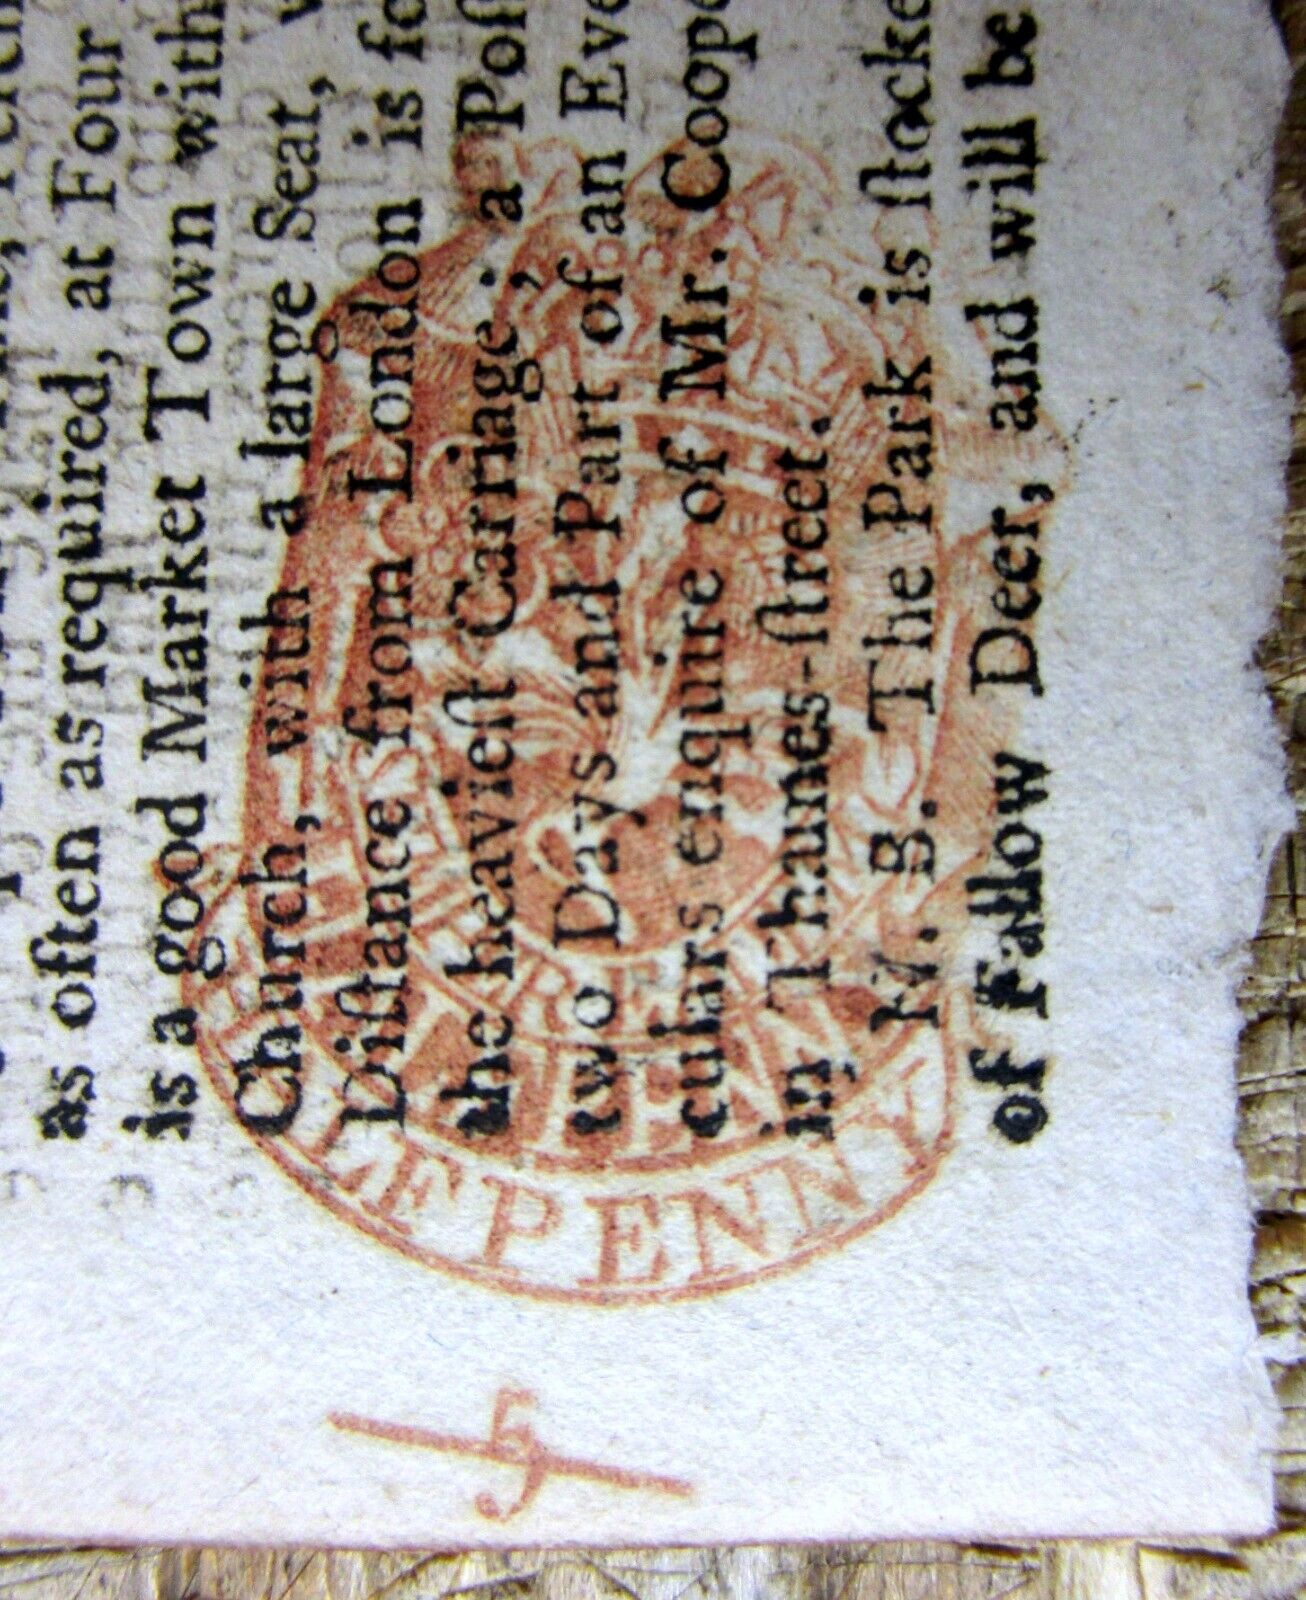 1758 French & Indian War newspaper LONDON England with RED British tax stamp